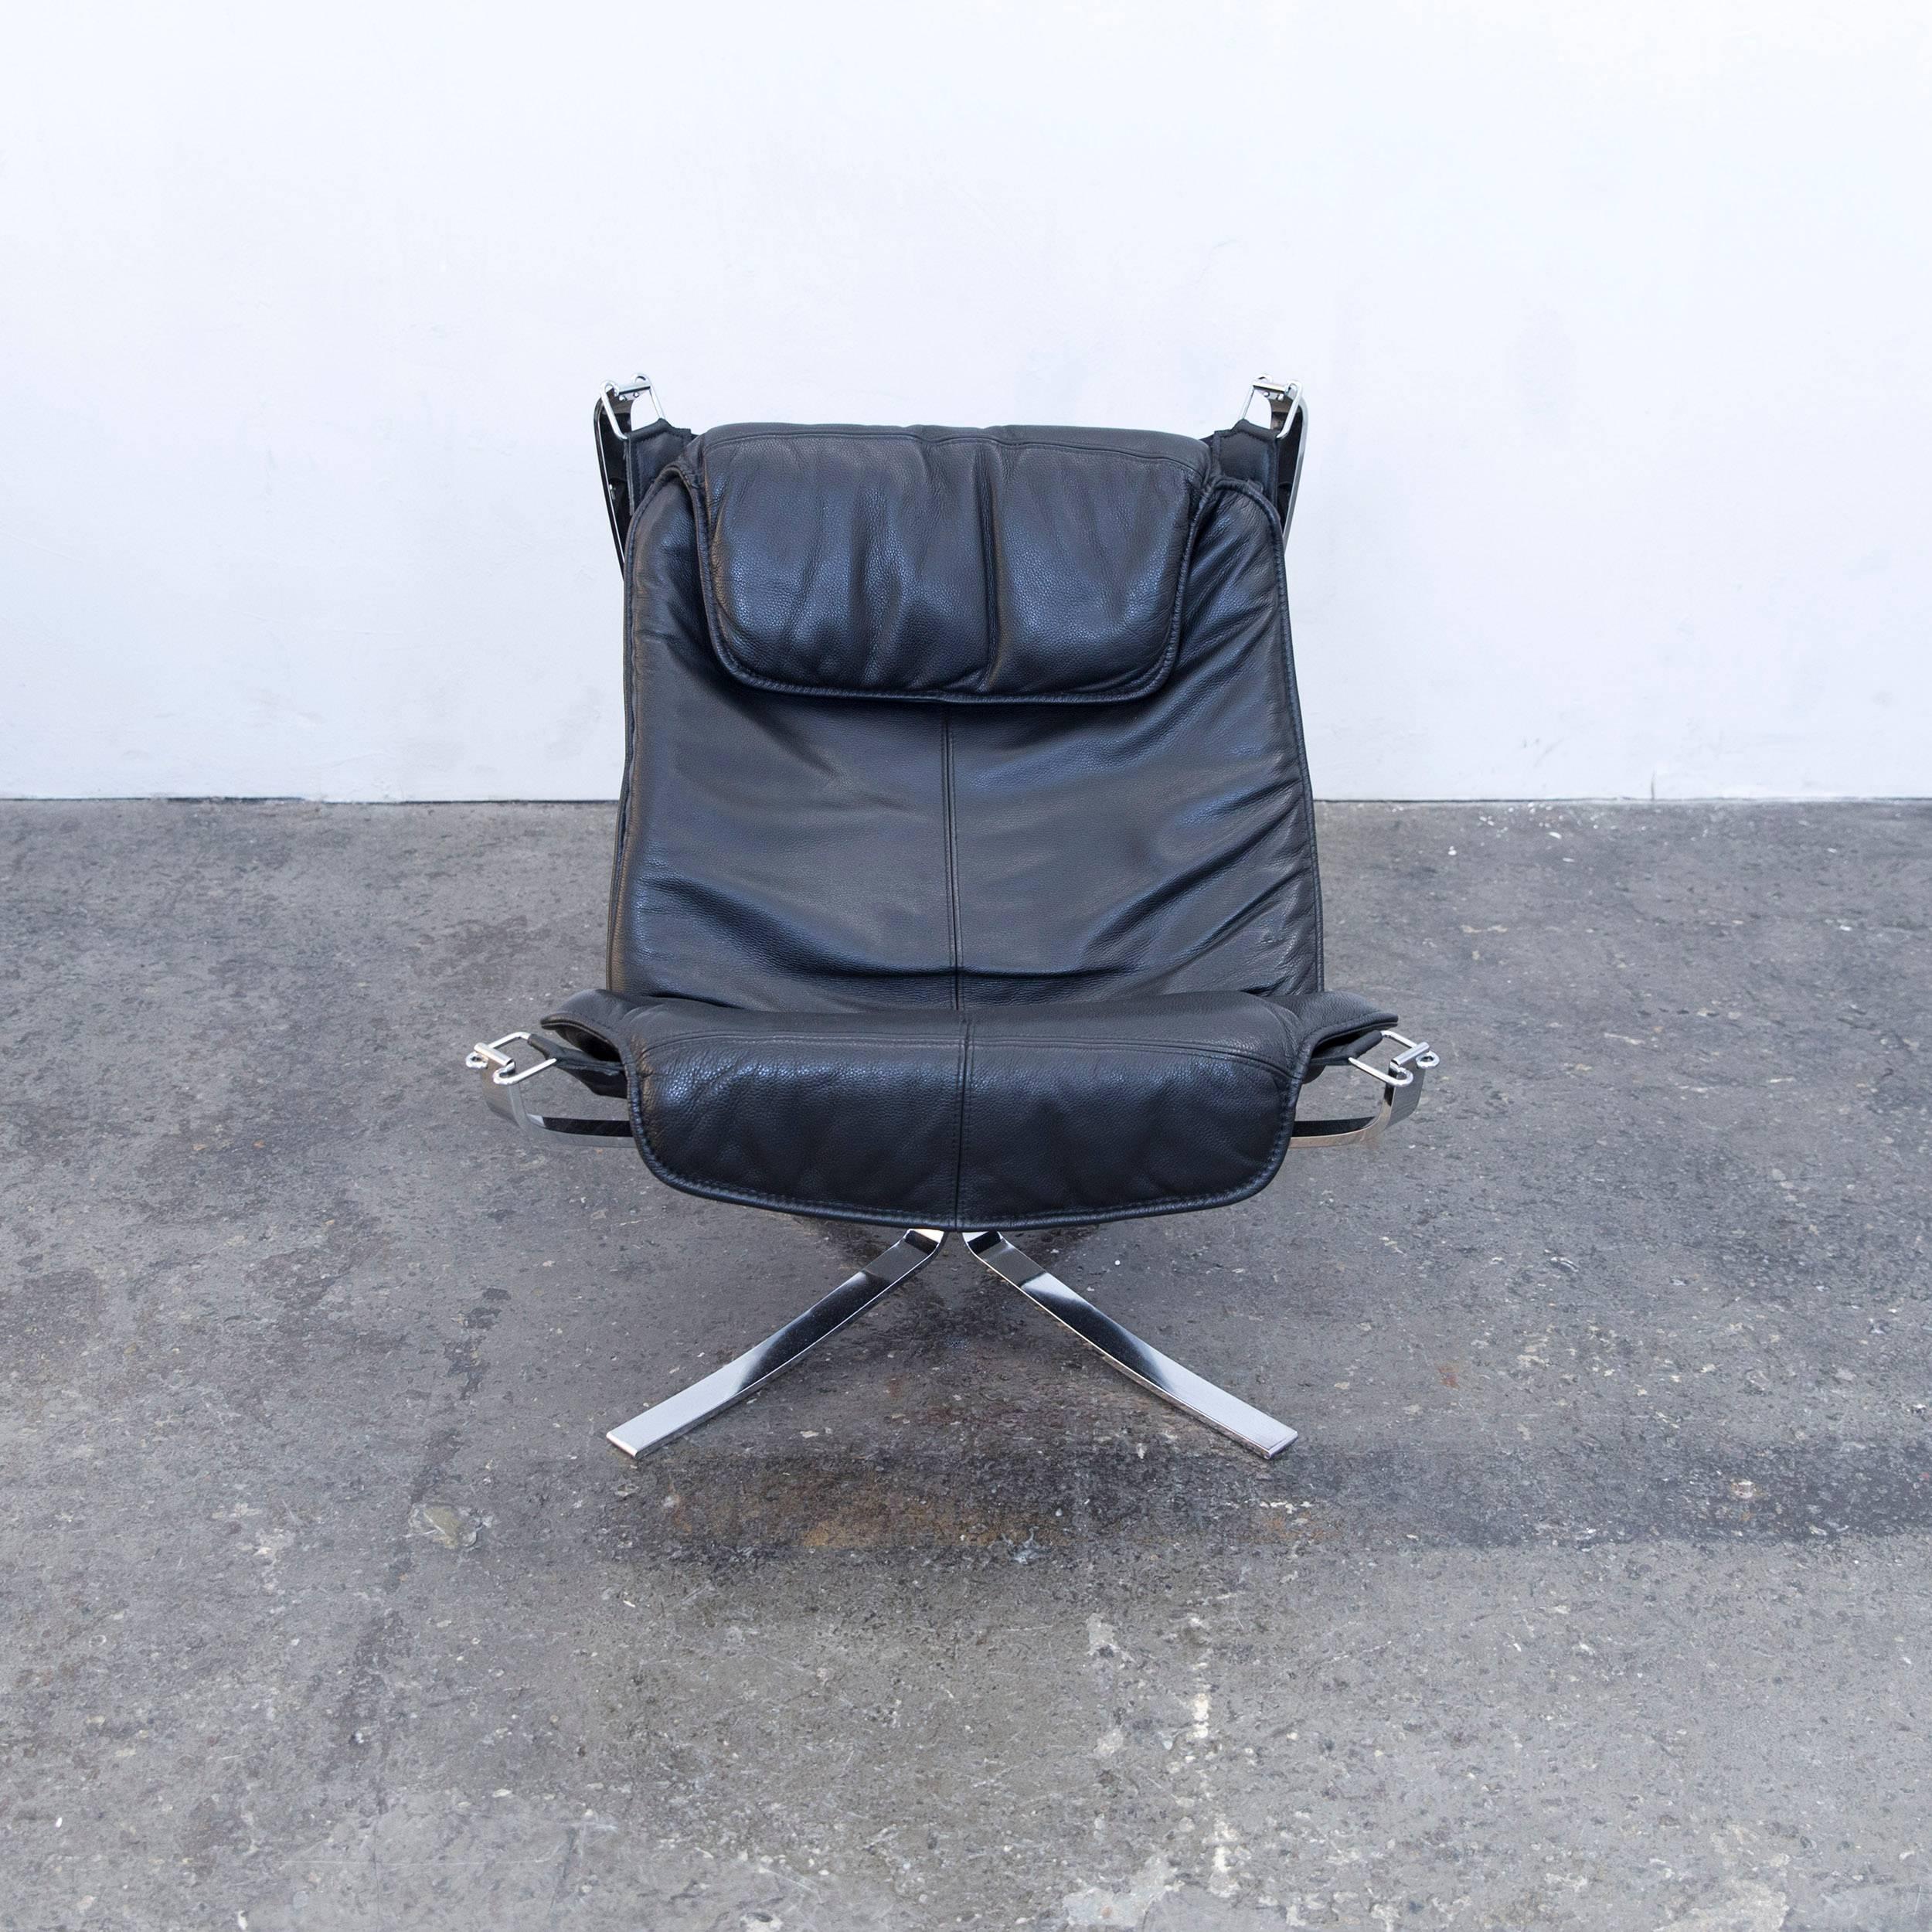 Norwegian Sigurd Resell Falcon Chair Leather Black Chrome One-Seat Footstool Modern